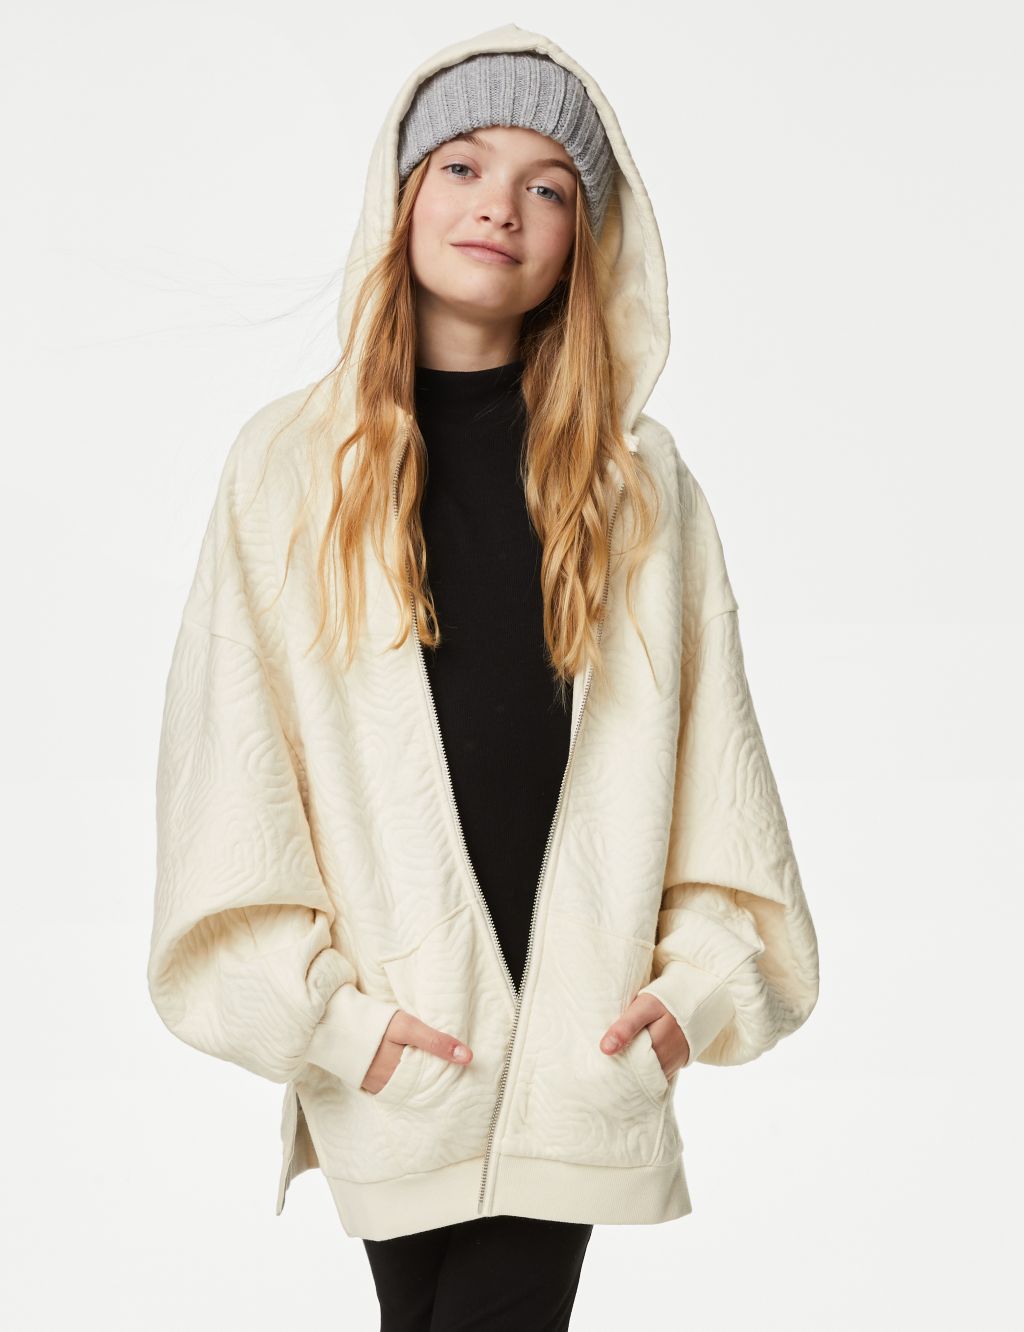 Cotton Rich Quilted Hoodie (6-16 Yrs)